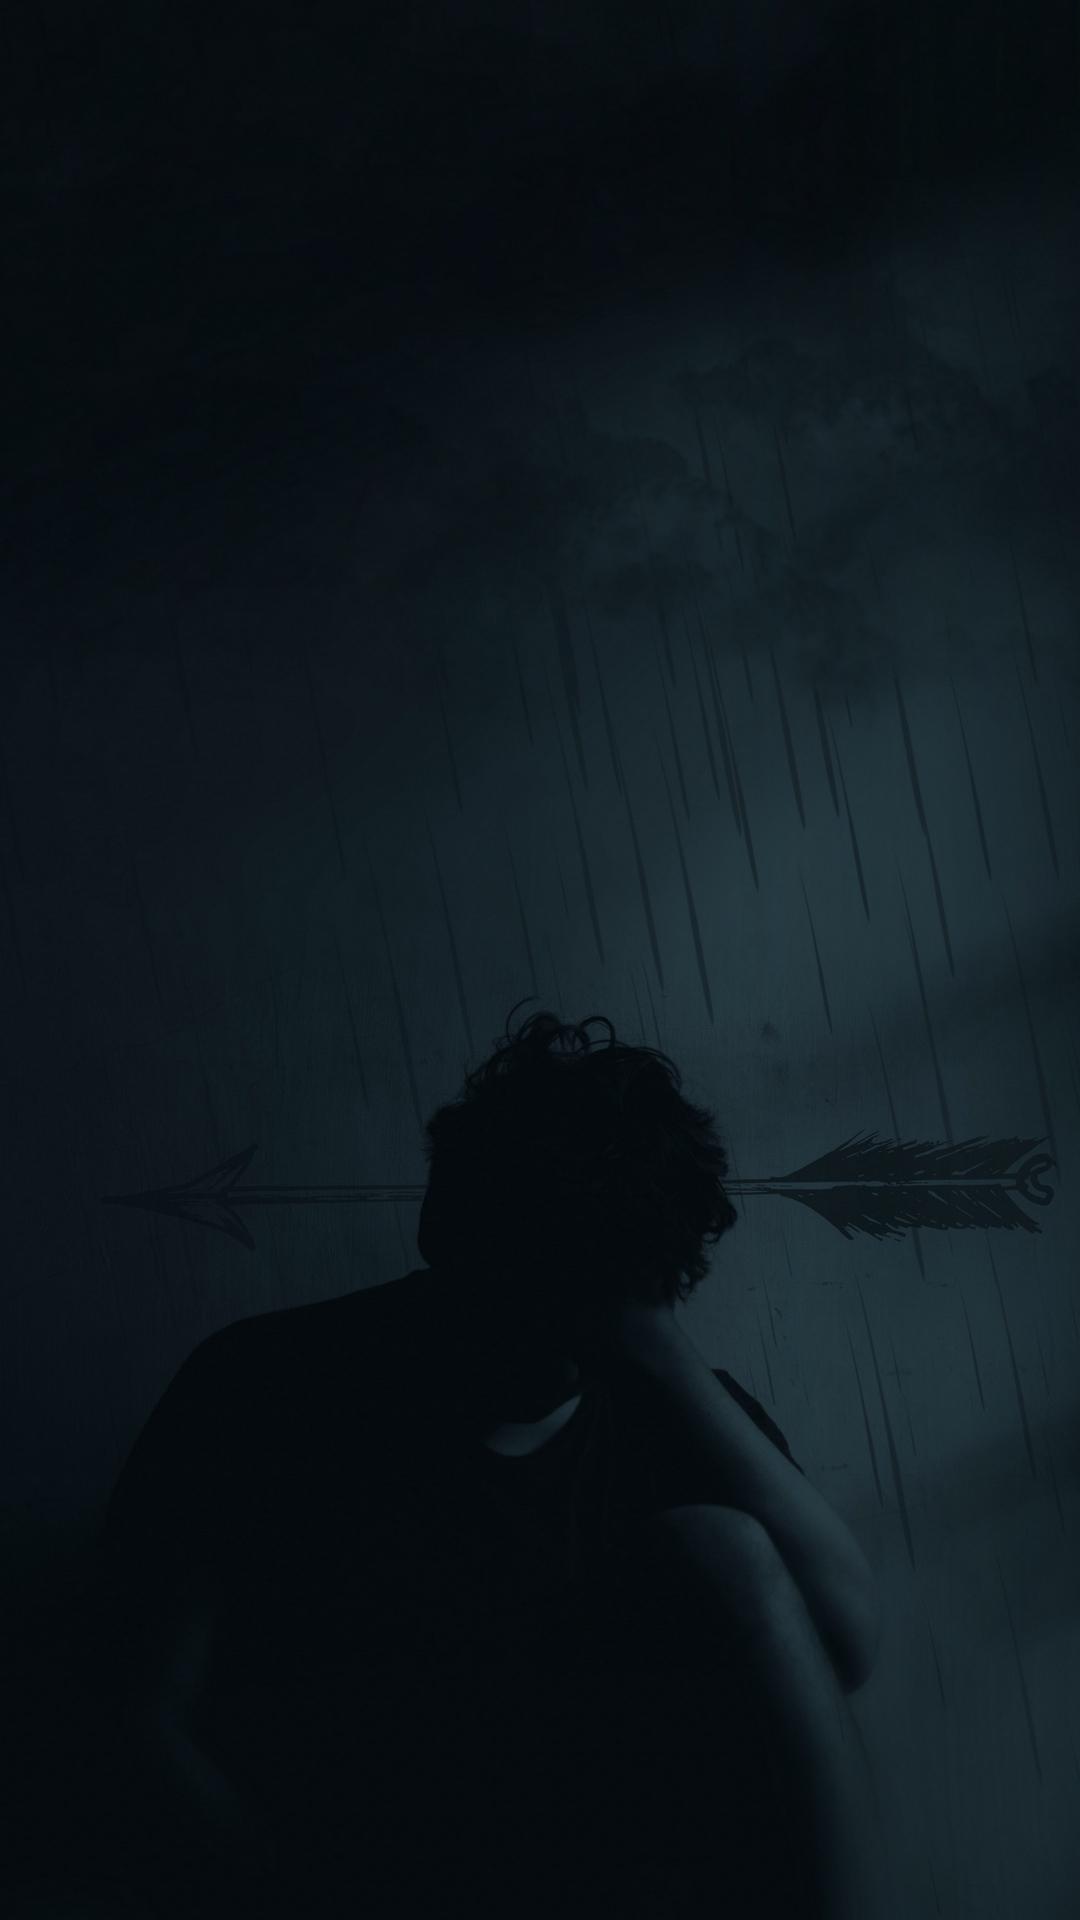 Download wallpaper 1080x1920 silhouette, arrow, loneliness, lonely